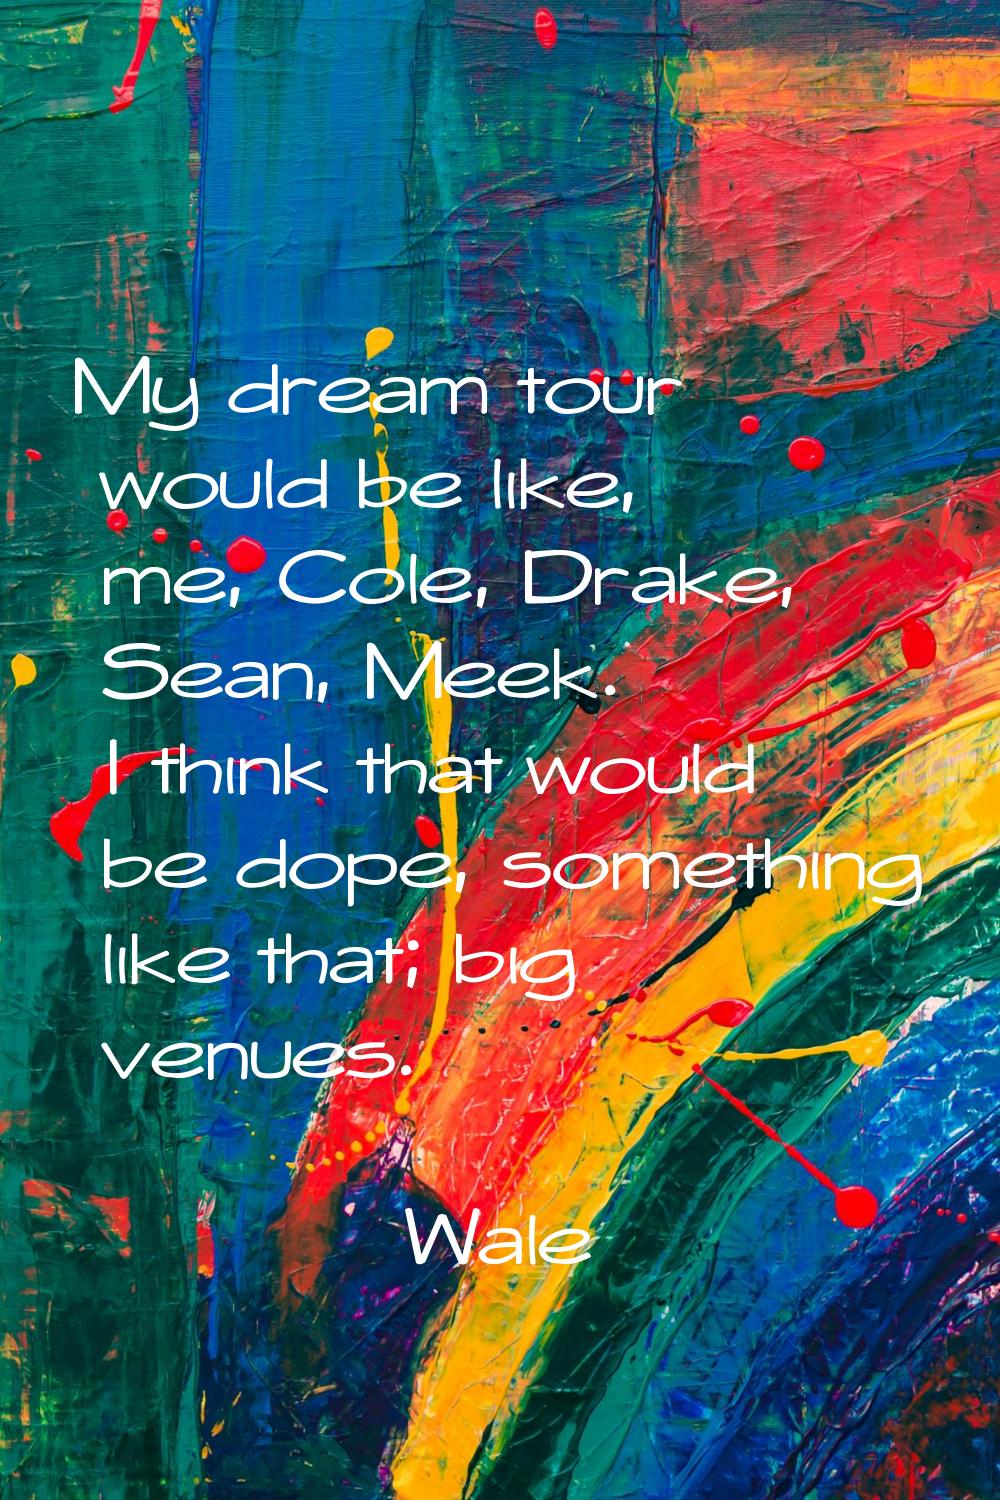 My dream tour would be like, me, Cole, Drake, Sean, Meek. I think that would be dope, something lik